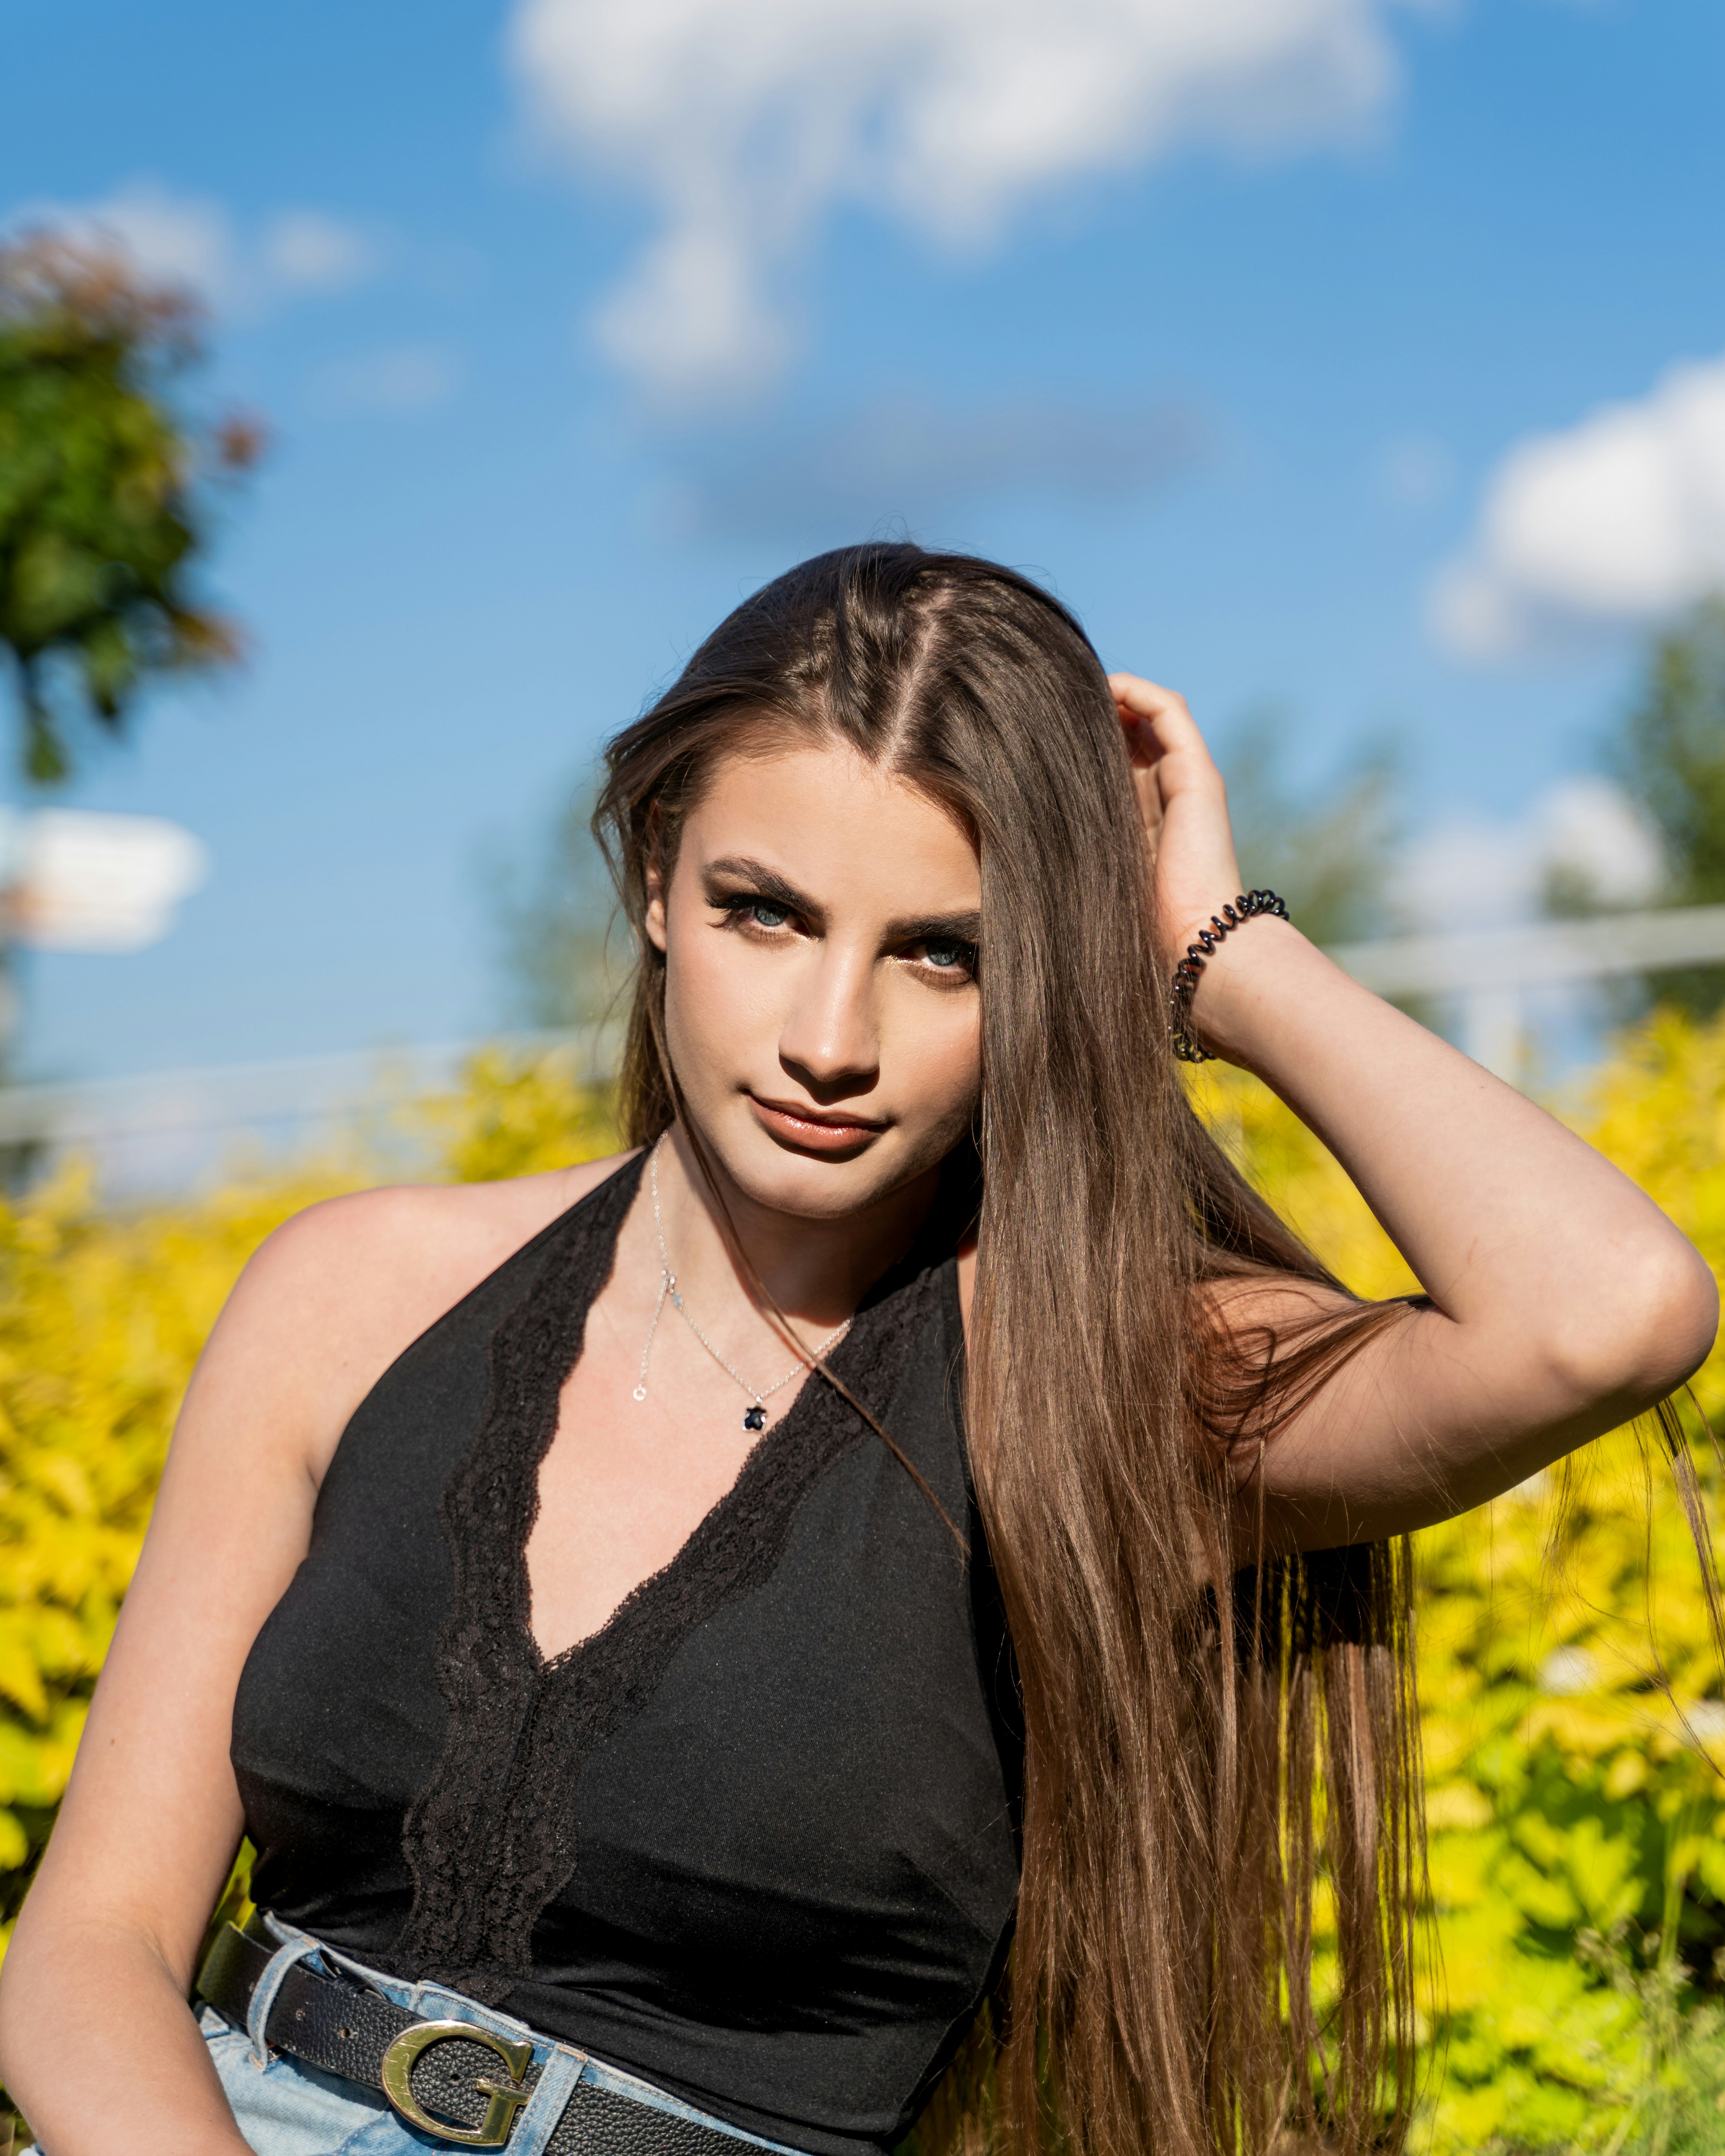 woman in black v neck shirt standing on yellow flower field during daytime